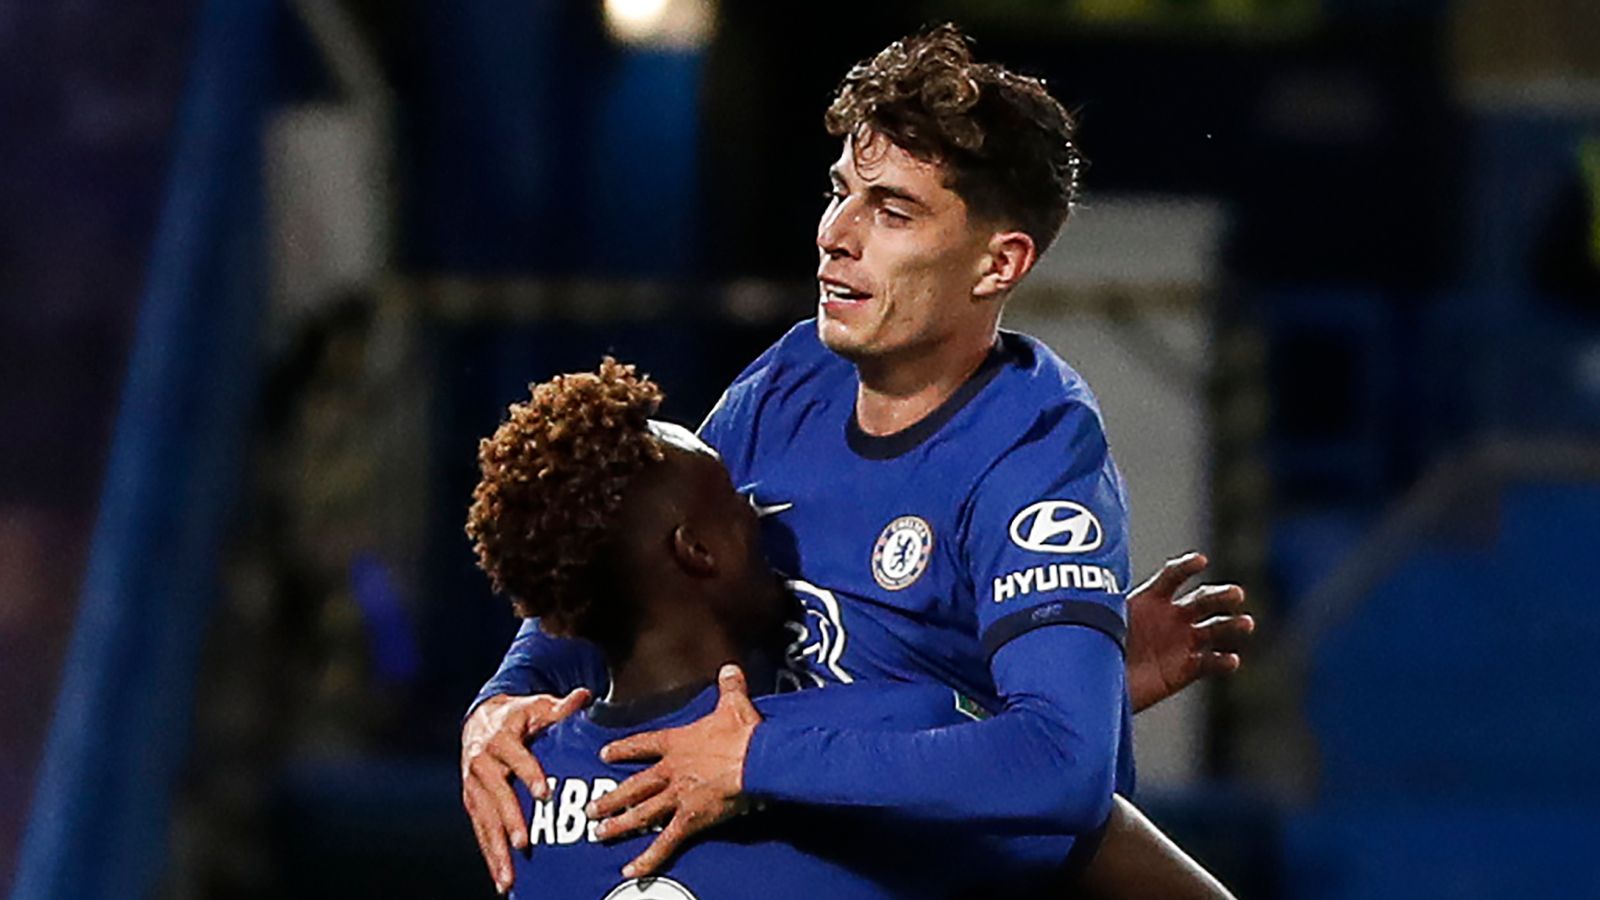   Chelsea 6-0 Bar‌a: Kai Howertz scores a hat-trick as the Blues retreat into the fourth round of the Carabao Cup.  Football news

